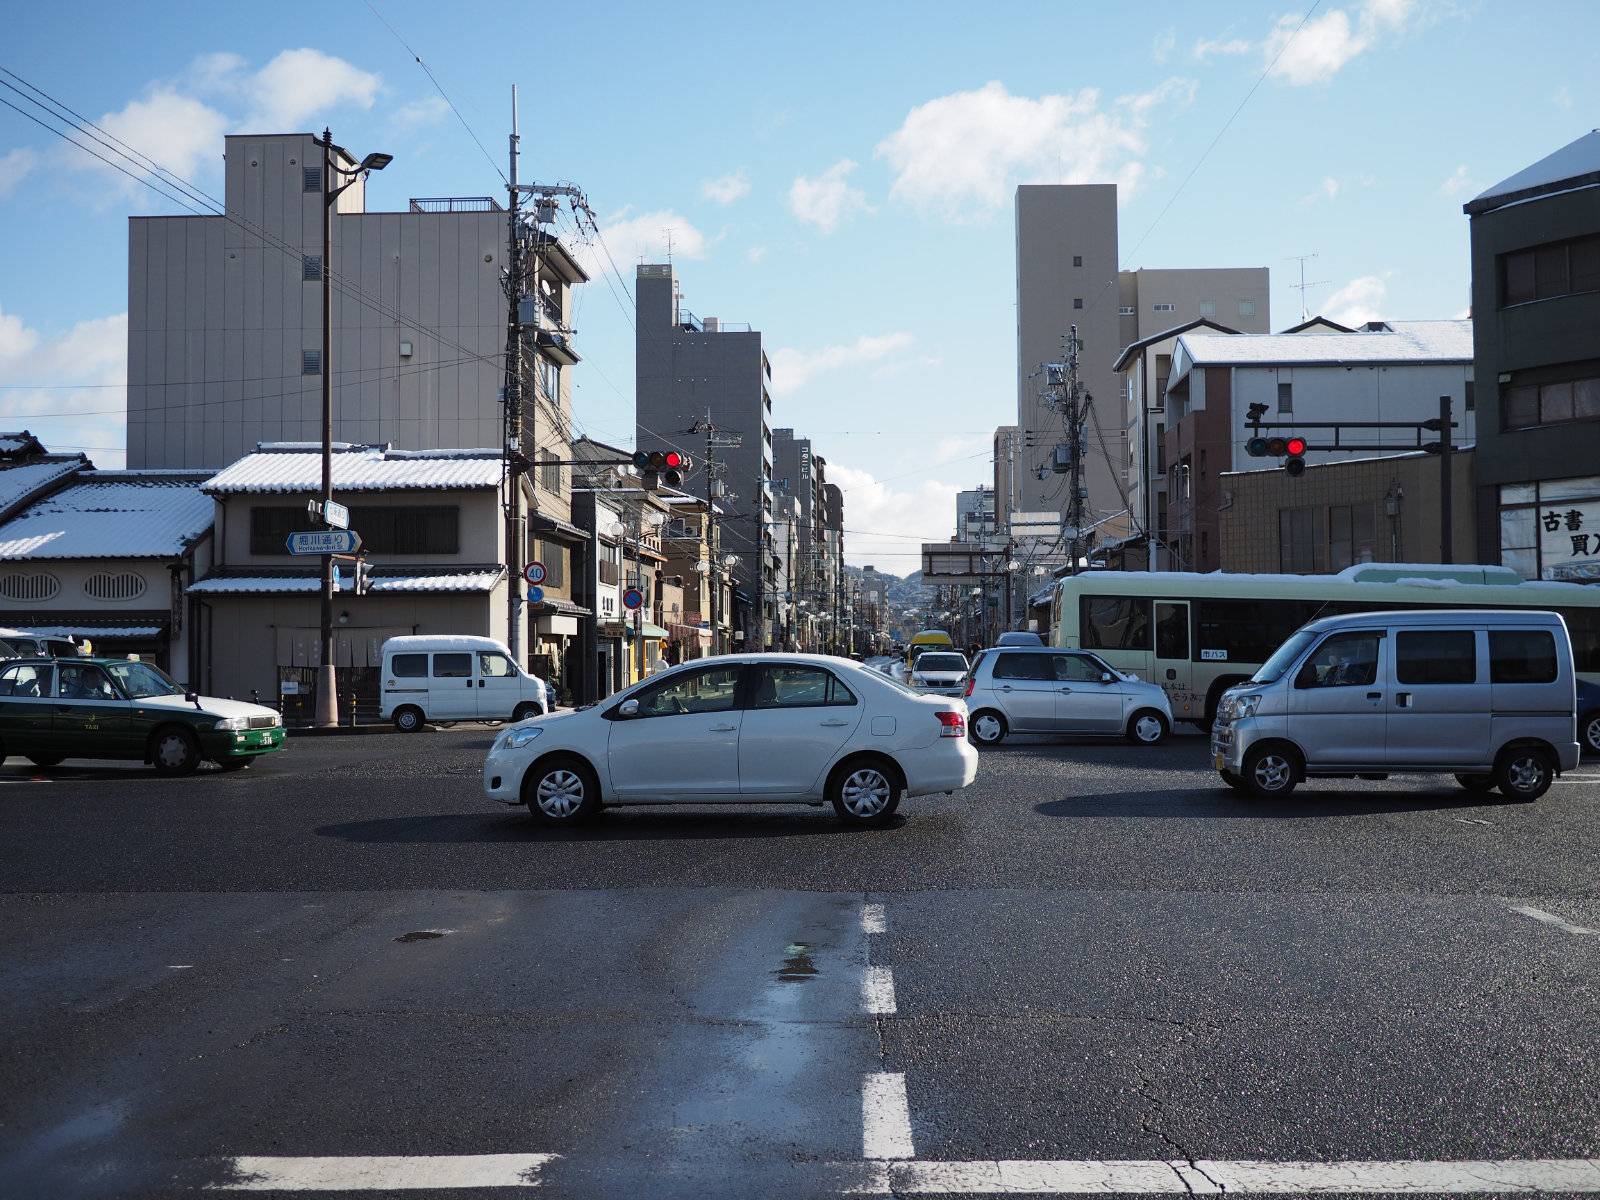 Kyoto intersection at street level